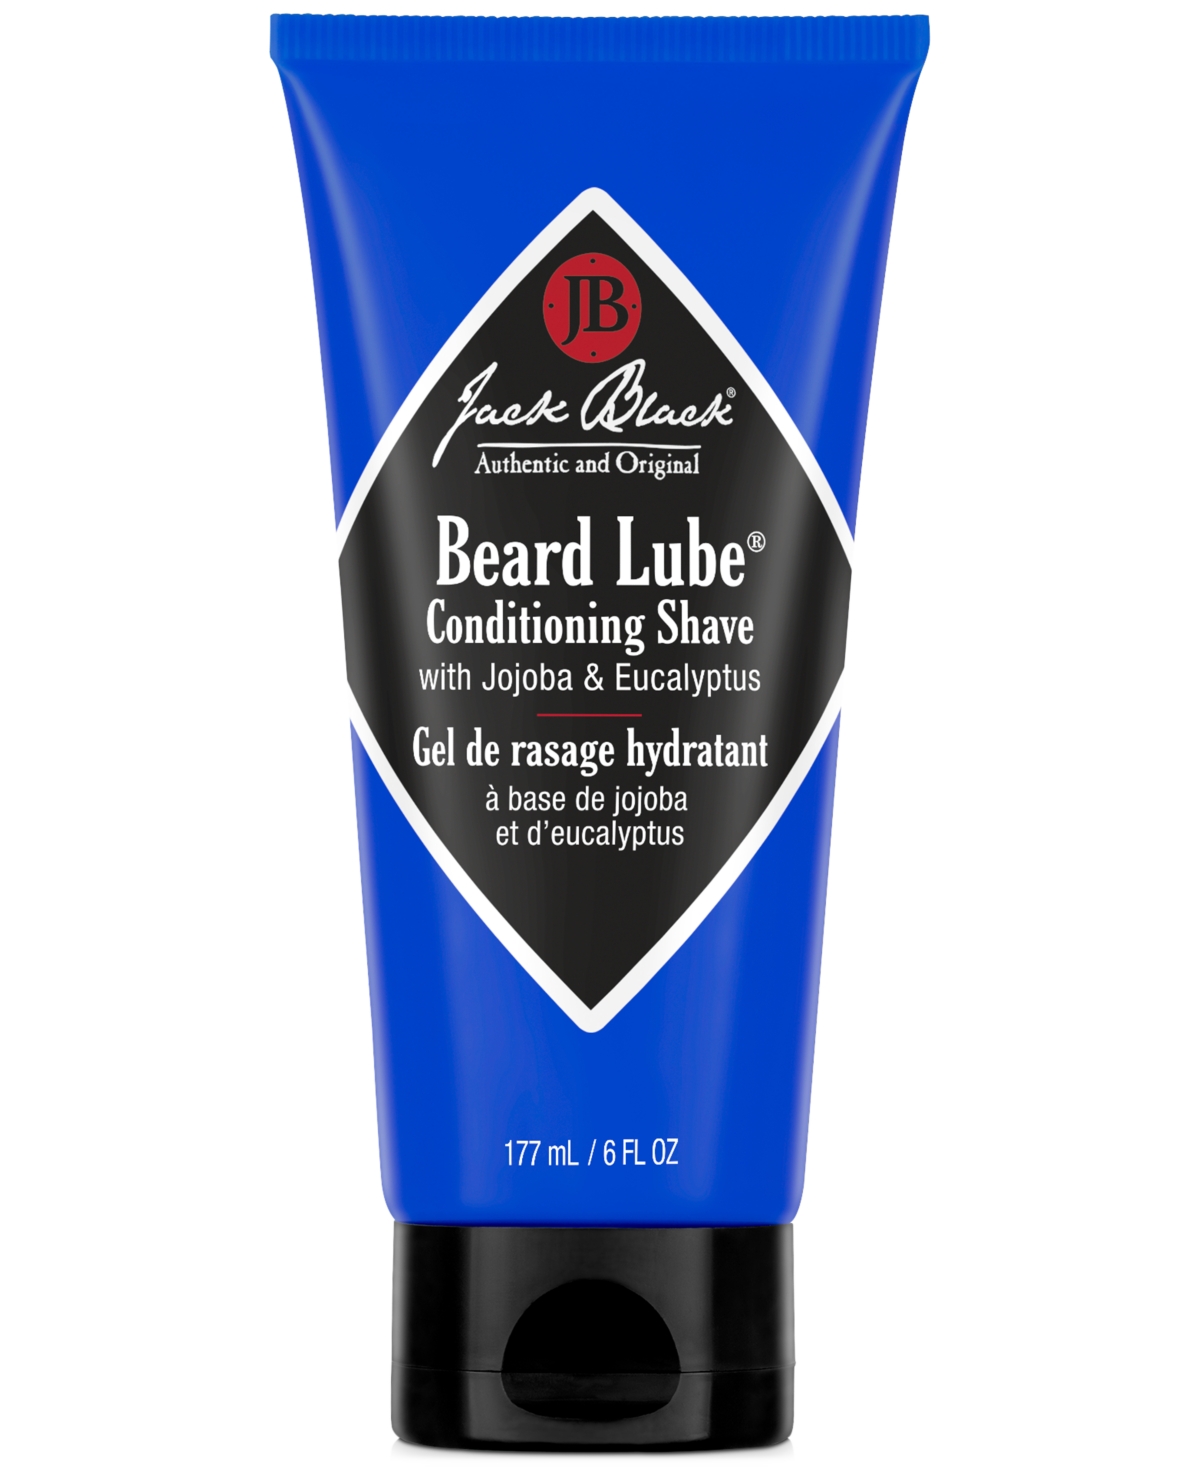 Beard Lube Conditioning Shave, 6 oz.